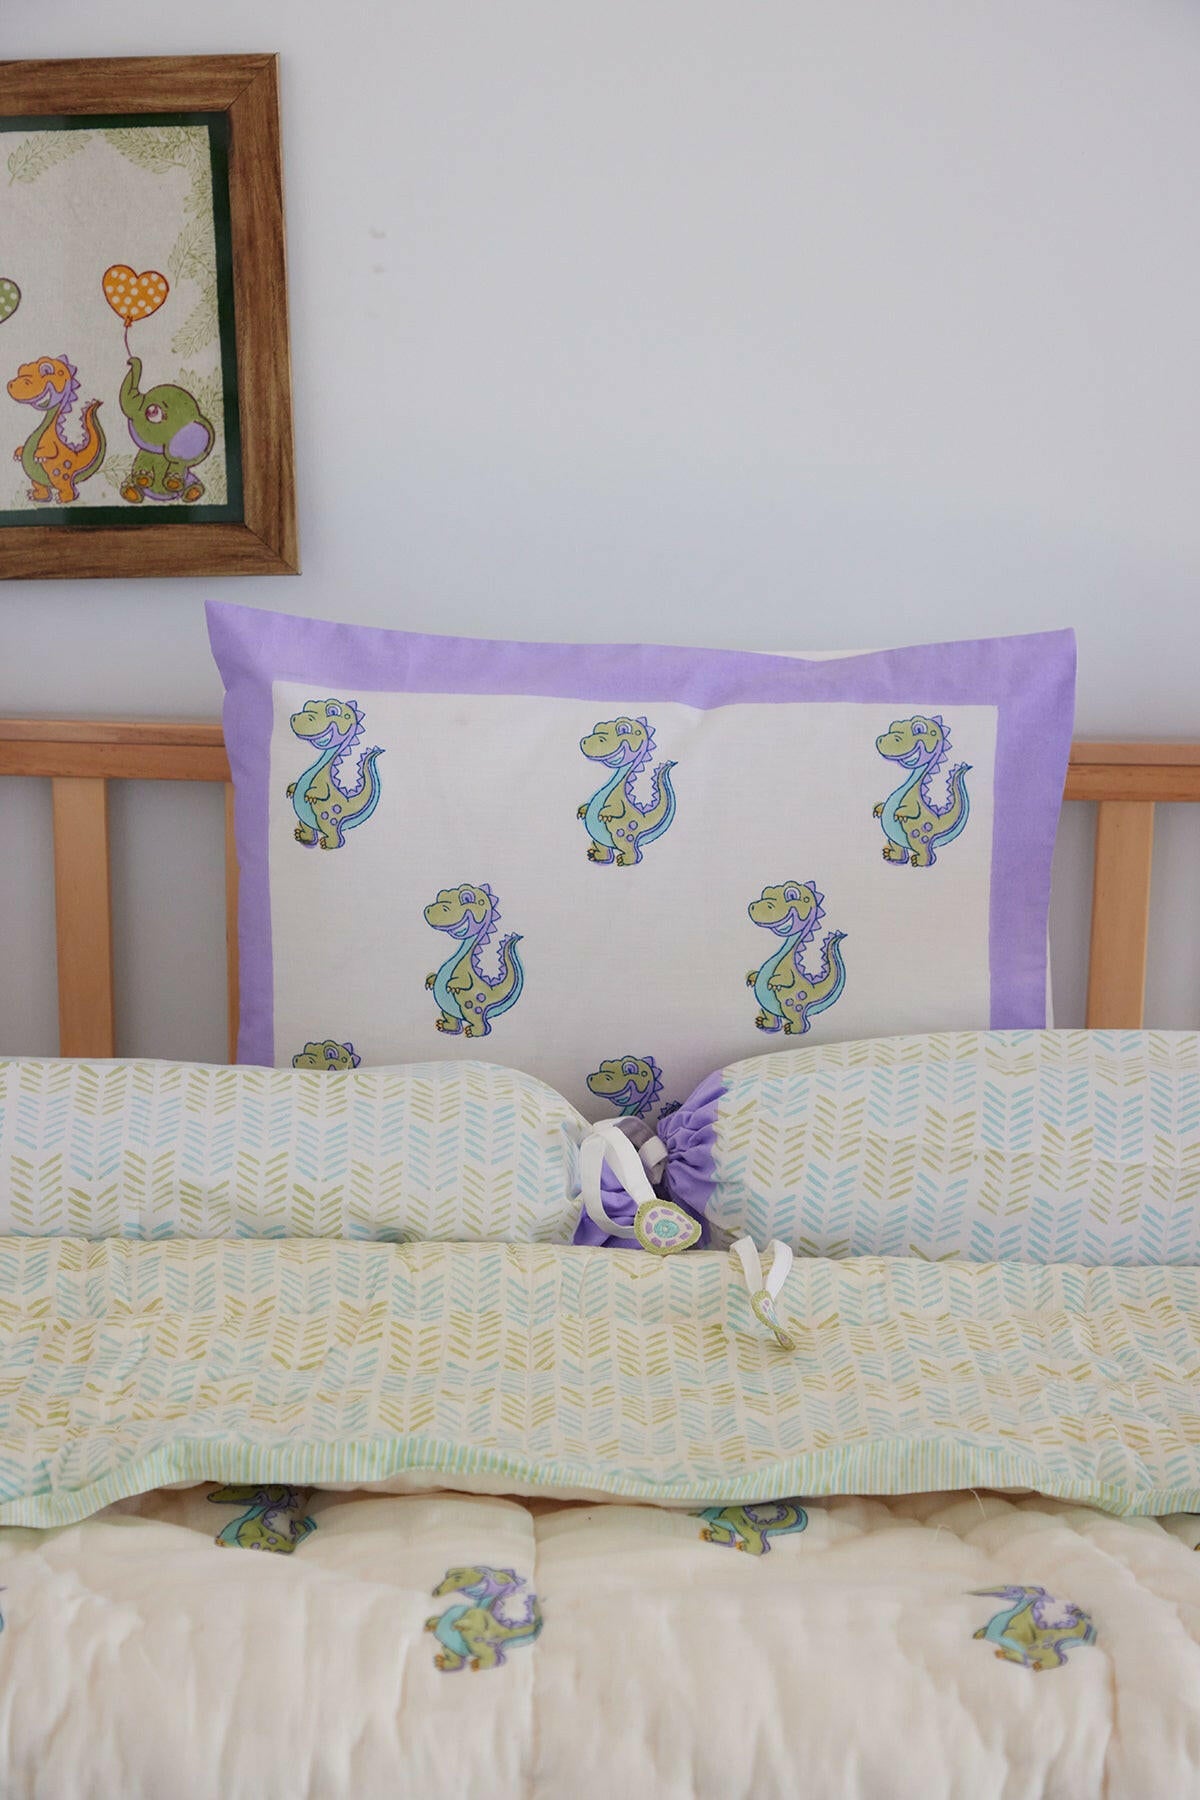 The Little Dino Cot Set